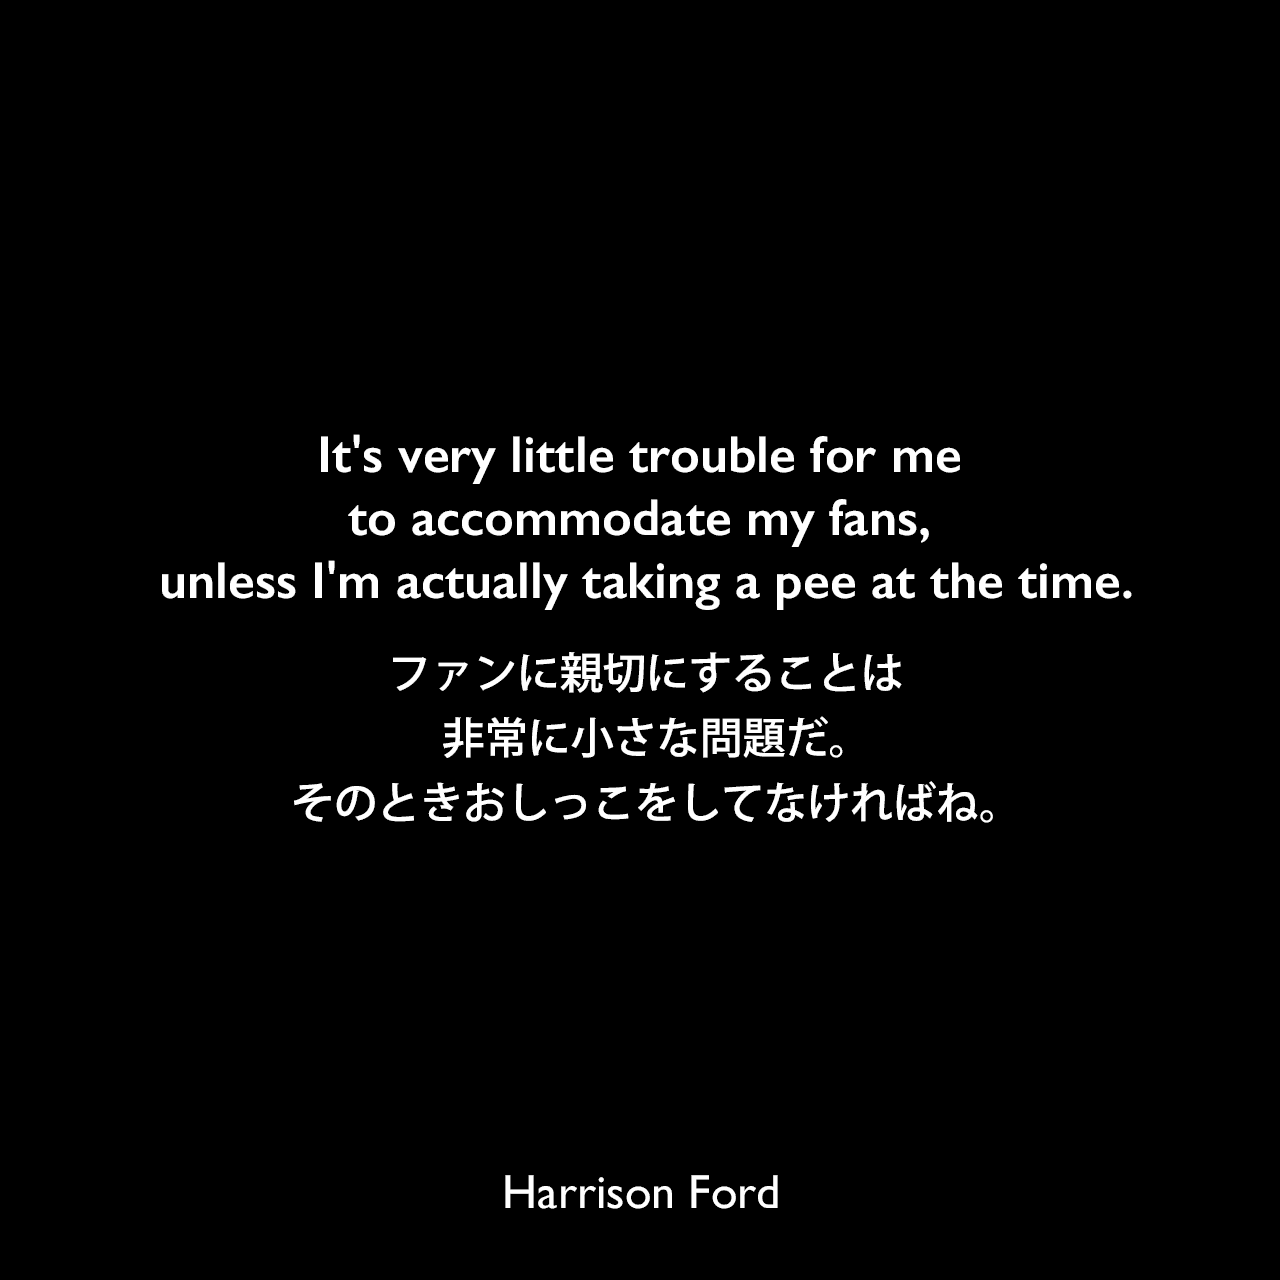 It's very little trouble for me to accommodate my fans, unless I'm actually taking a pee at the time.ファンに親切にすることは、非常に小さな問題だ。そのときおしっこをしてなければね。Harrison Ford